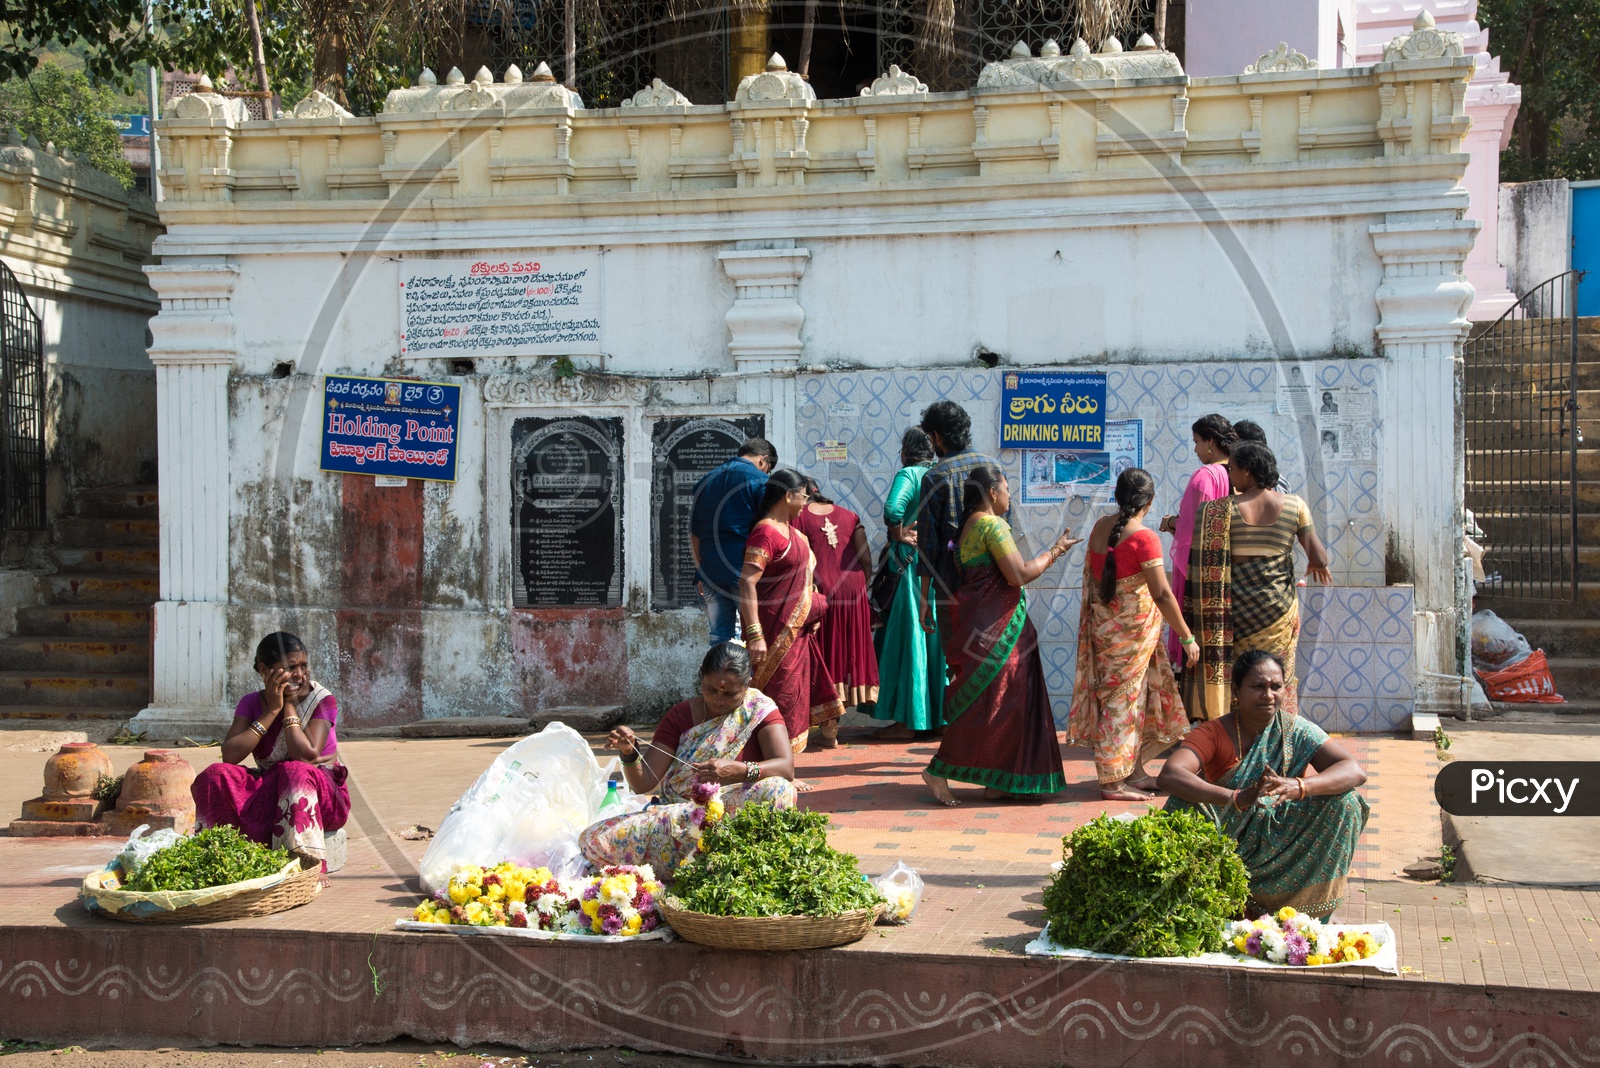 Vendors at Indian Temple